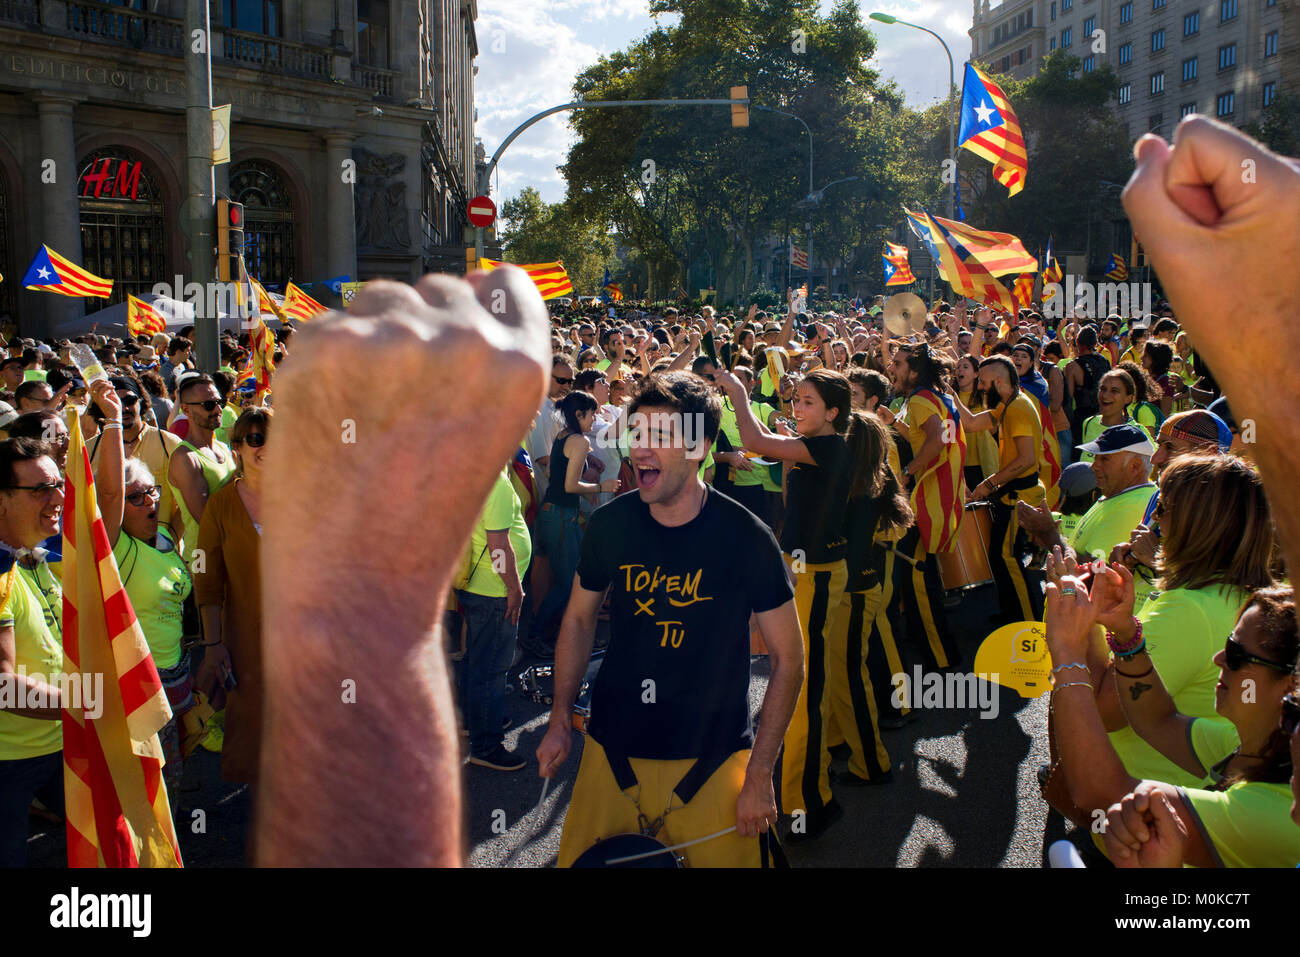 One million Catalans march for independence on September 11, 2017 in Barcelona center, Catalonia, Spain Stock Photo